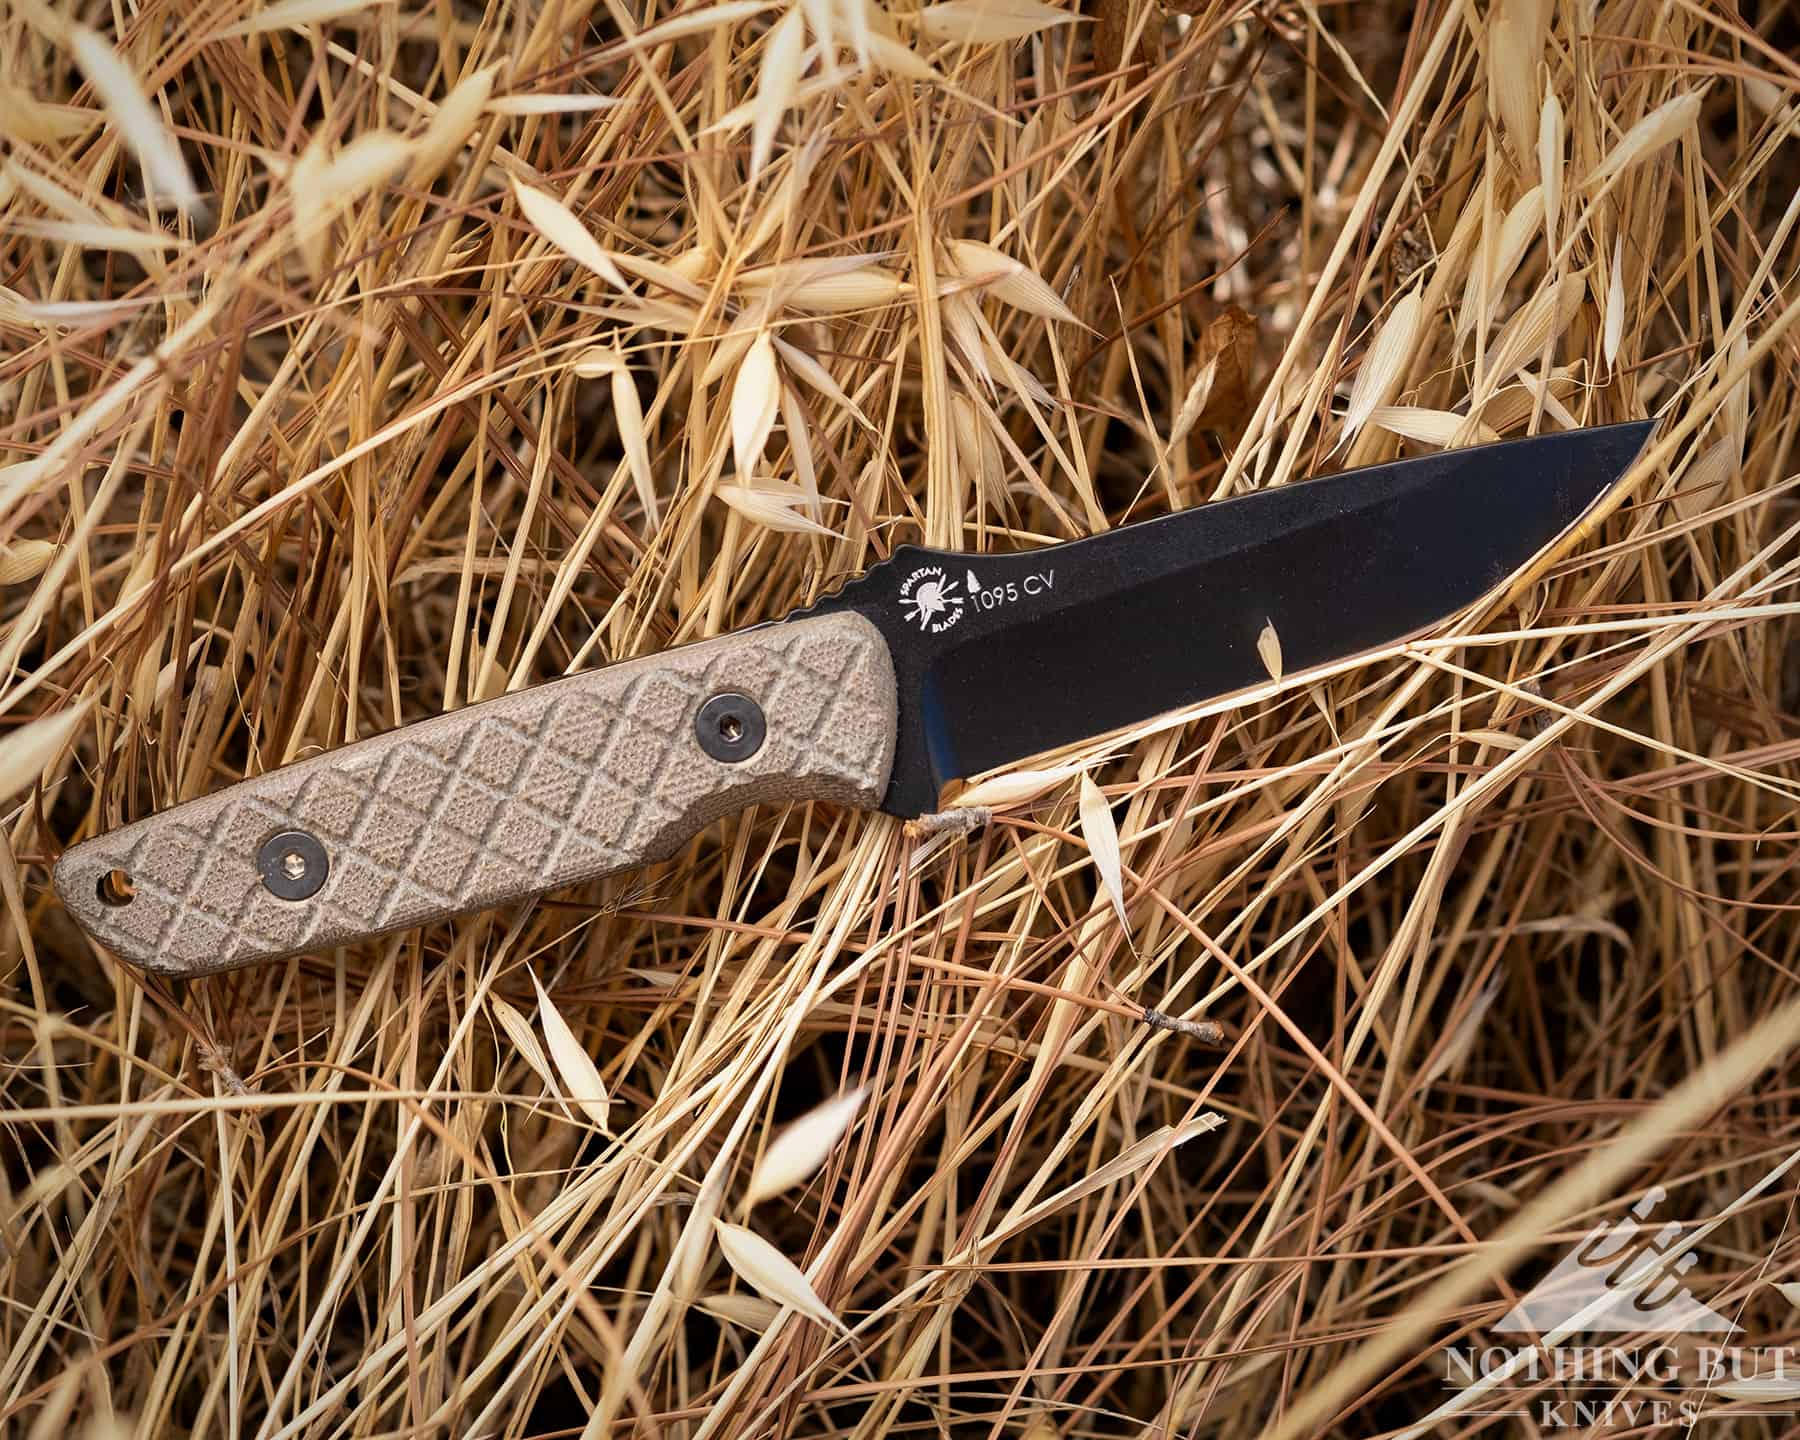 The Alala is a tough survival and tactical knife hybrid that should last for many years. 